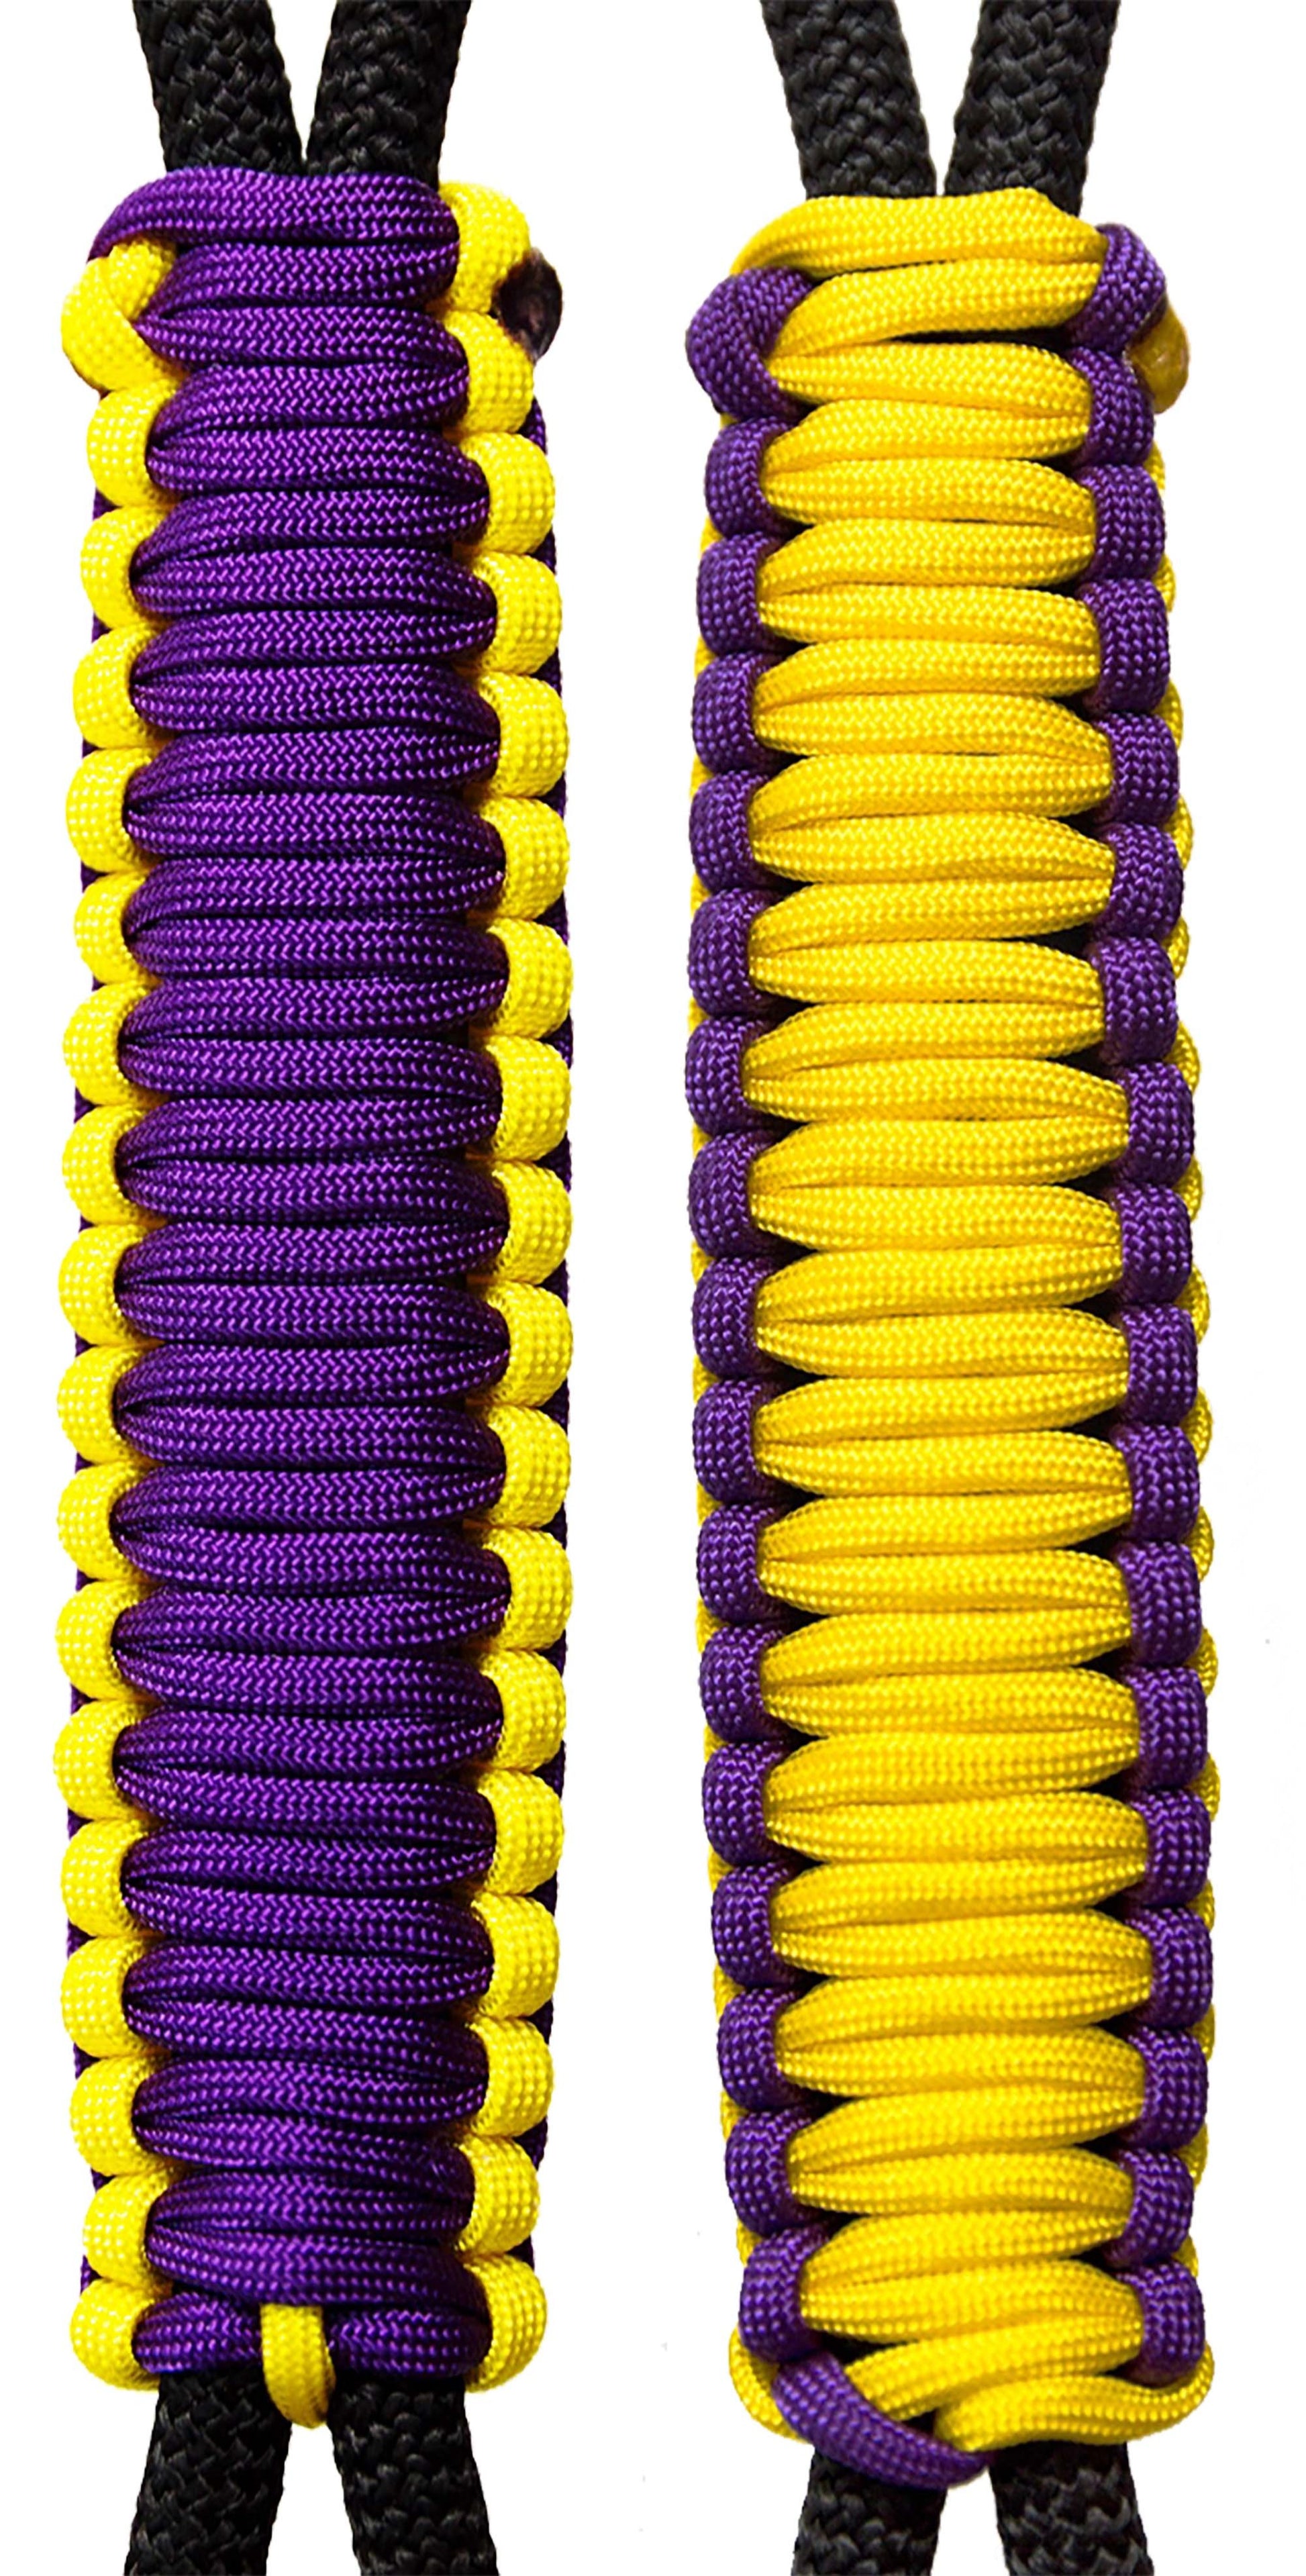 Purple & Yellow C024C027 - Paracord Handmade Handles for Stainless Steel Tumblers - Made in USA!